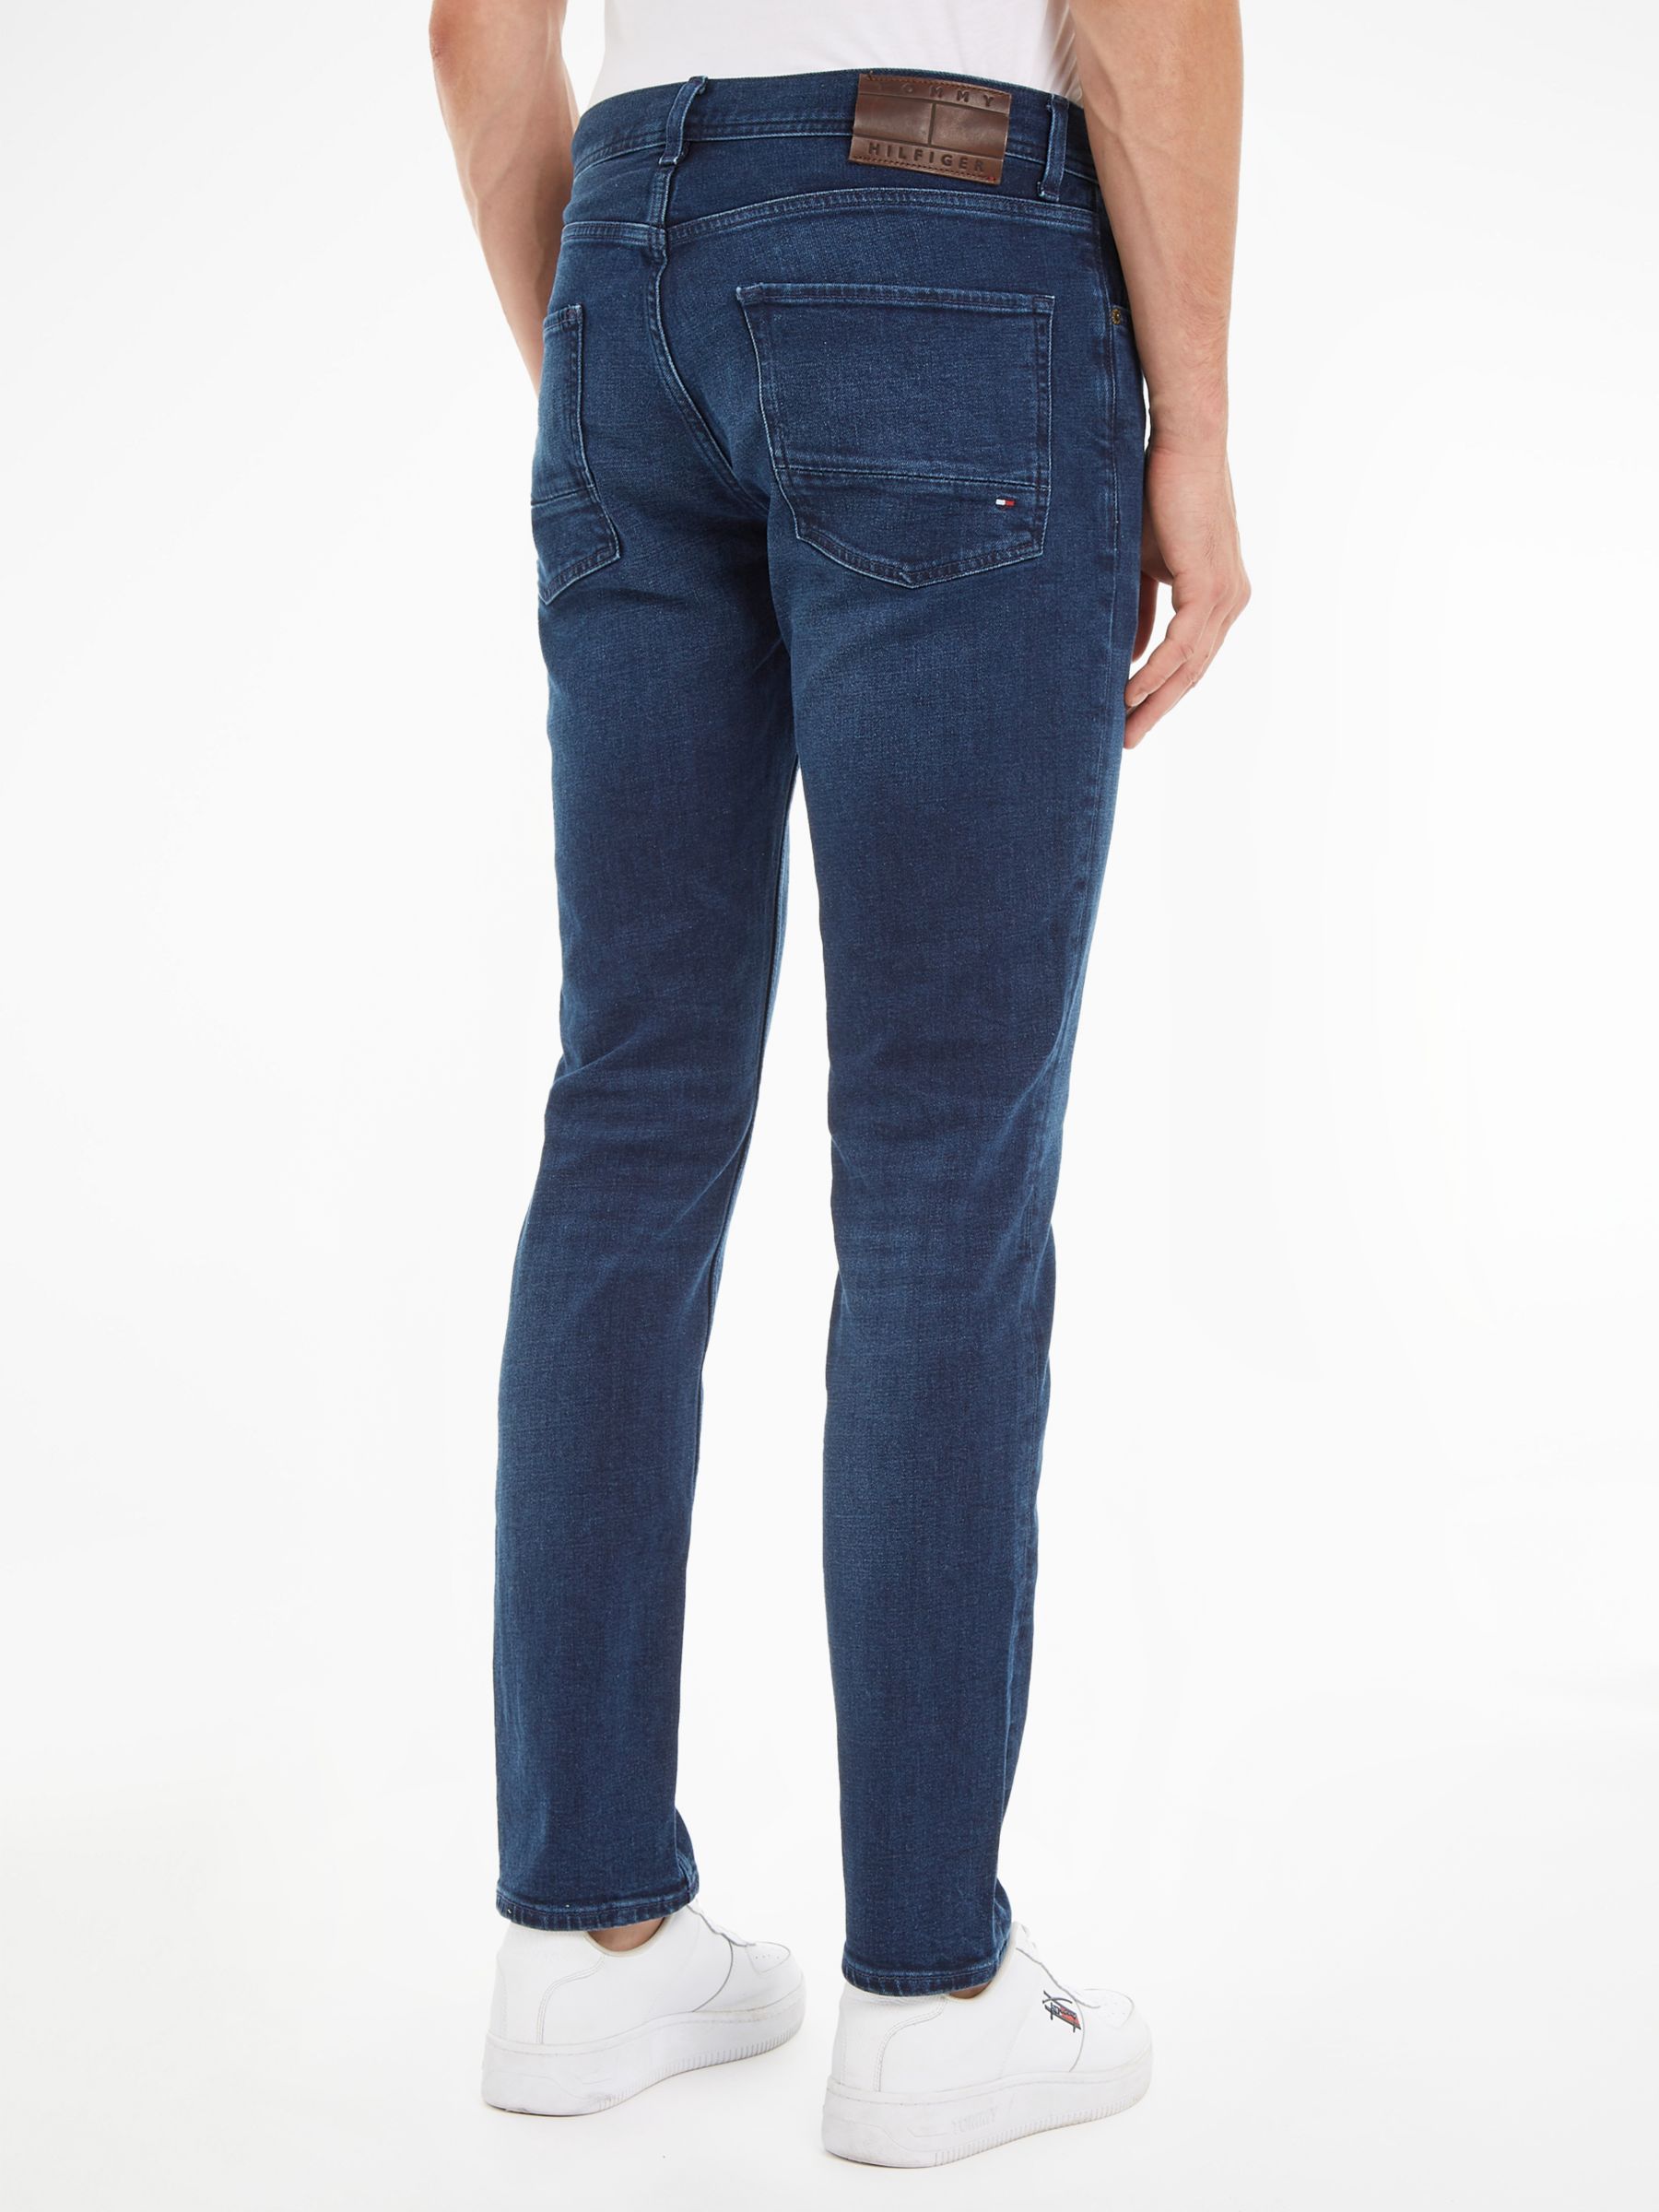 Tommy Hilfiger Denton Straight Jeans at John Lewis & Partners